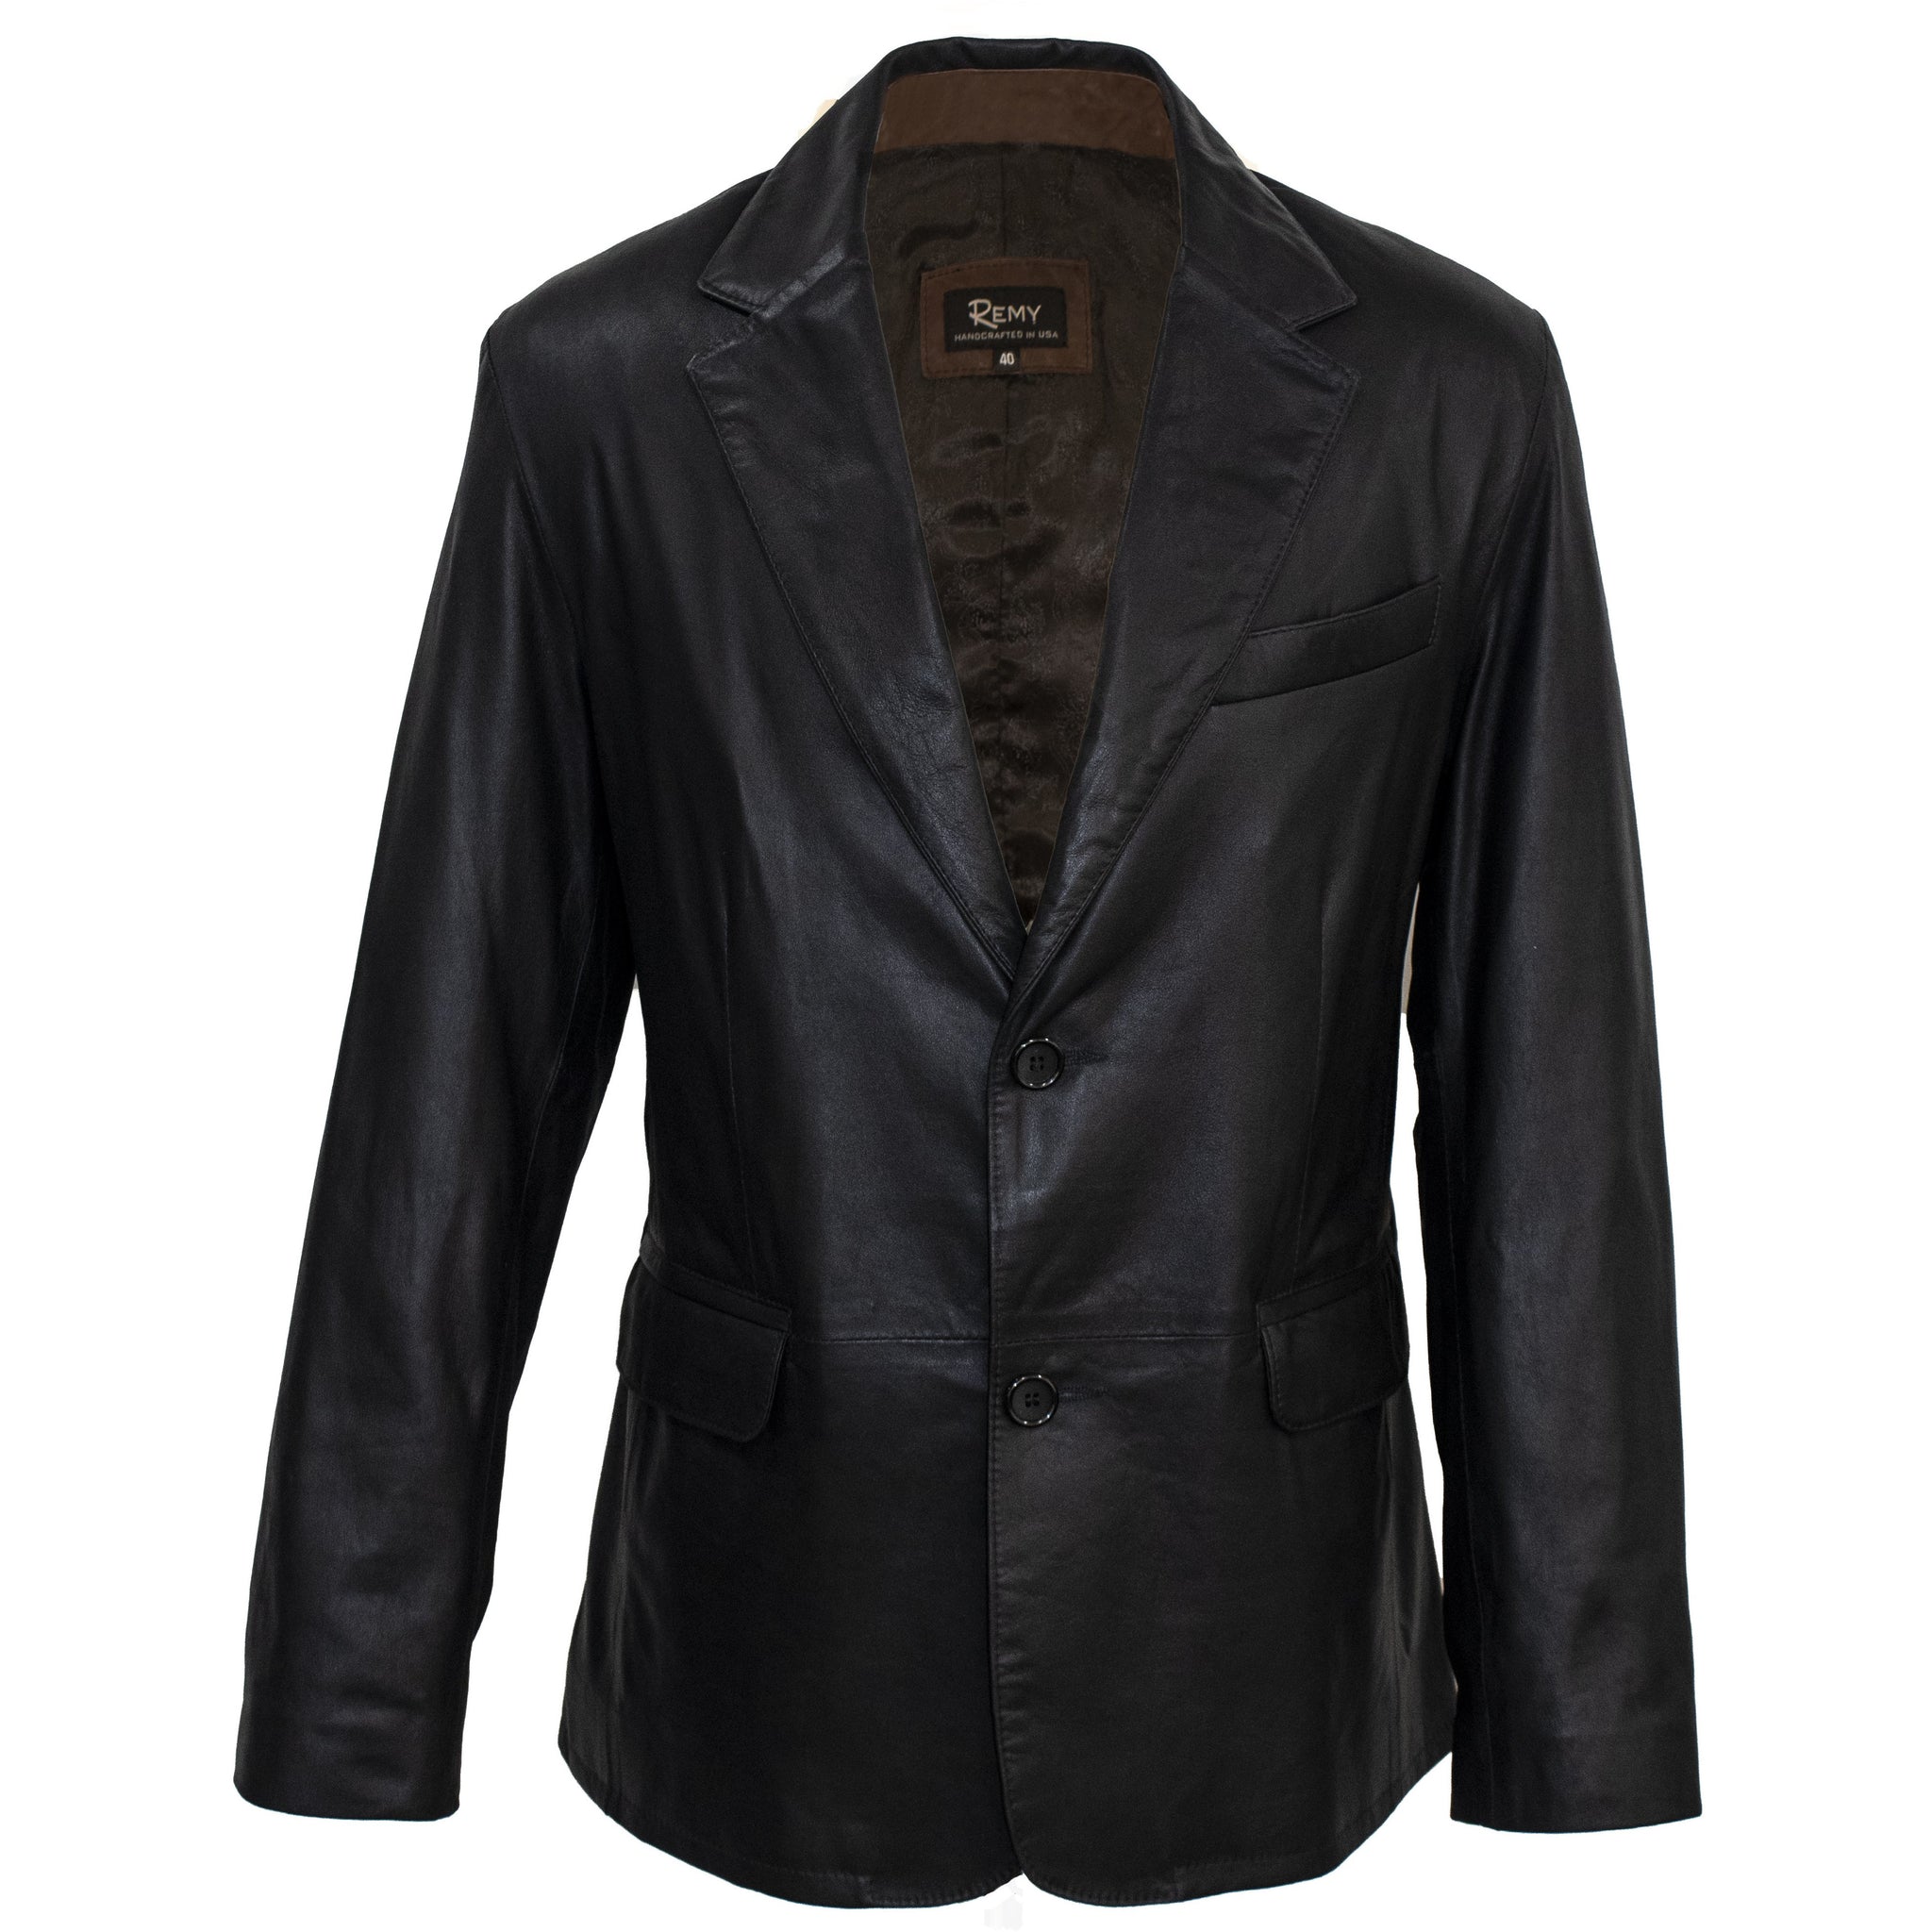 8030 - Mens Leather Two Button Blazer in Peat/Rustic – Remy Leather